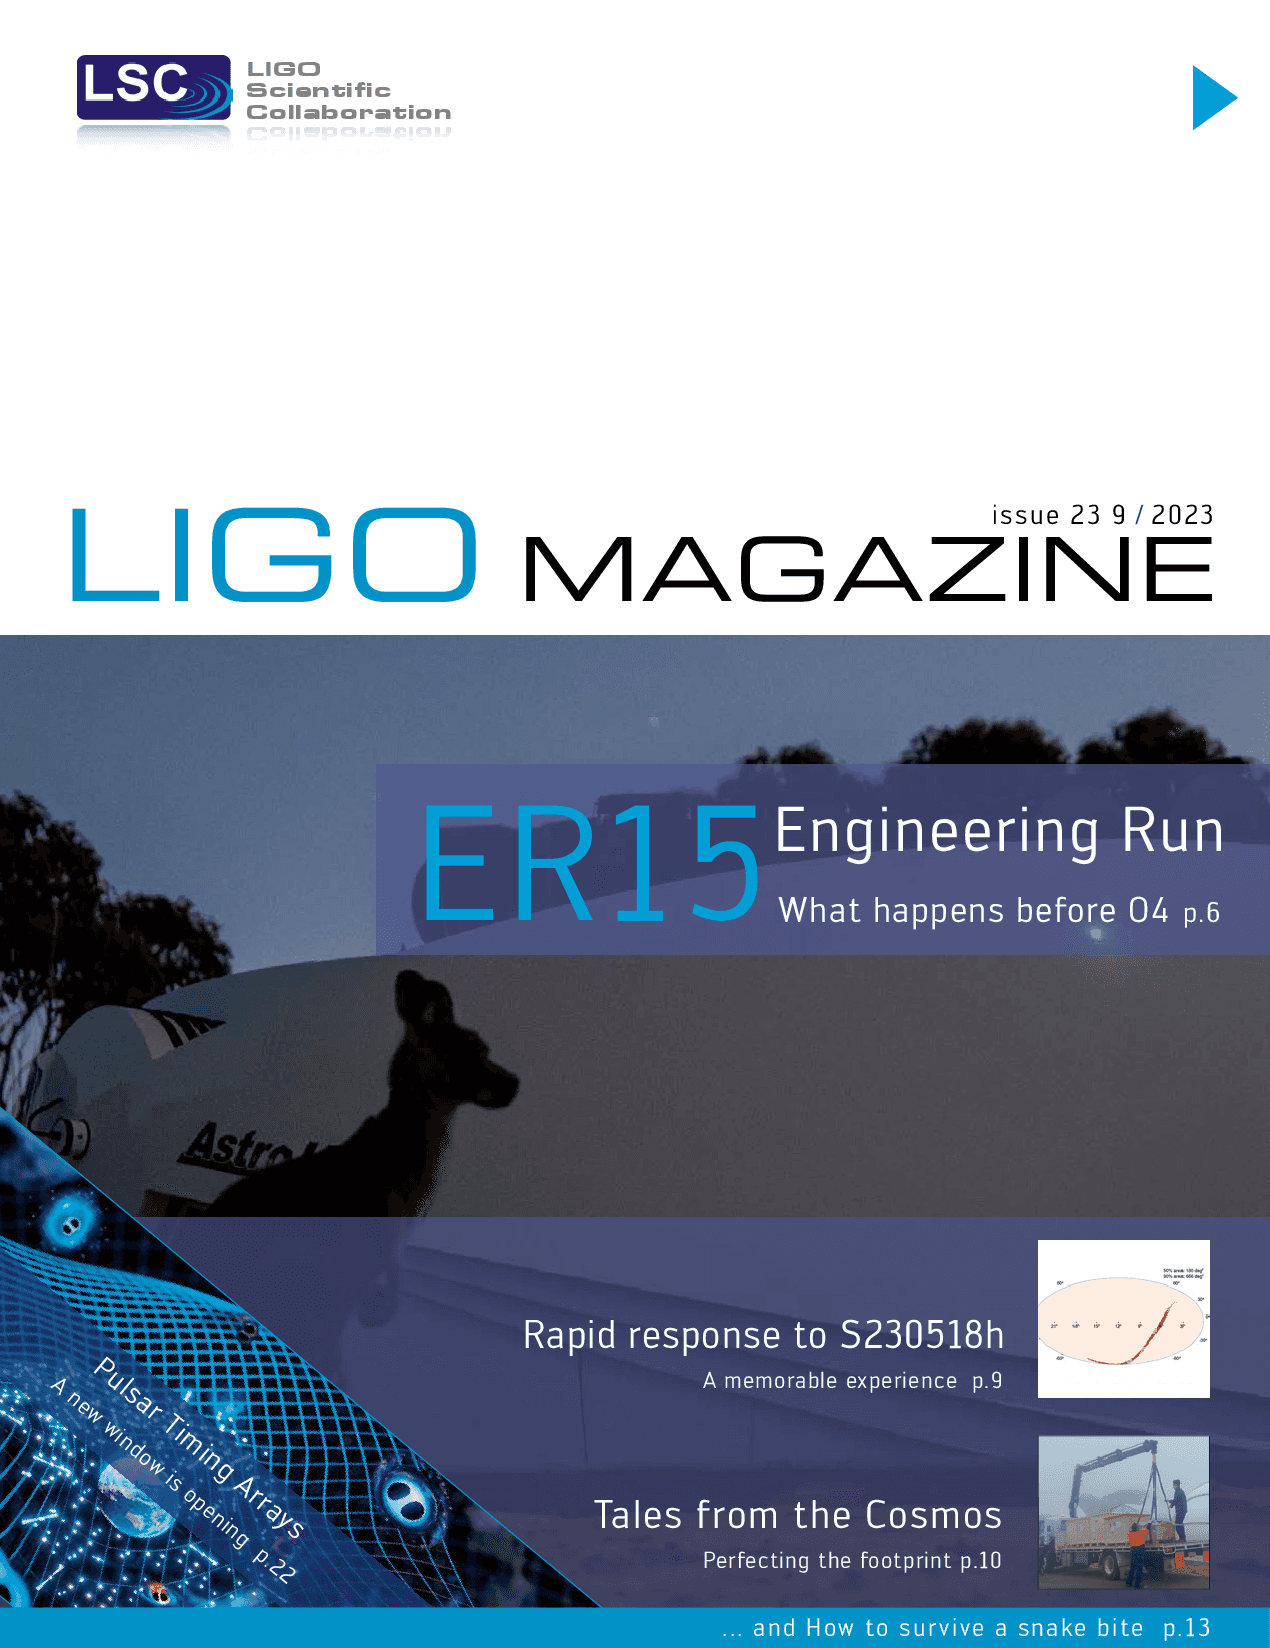 News-Image 11 of: New LIGO Magazine Issue 23 is out